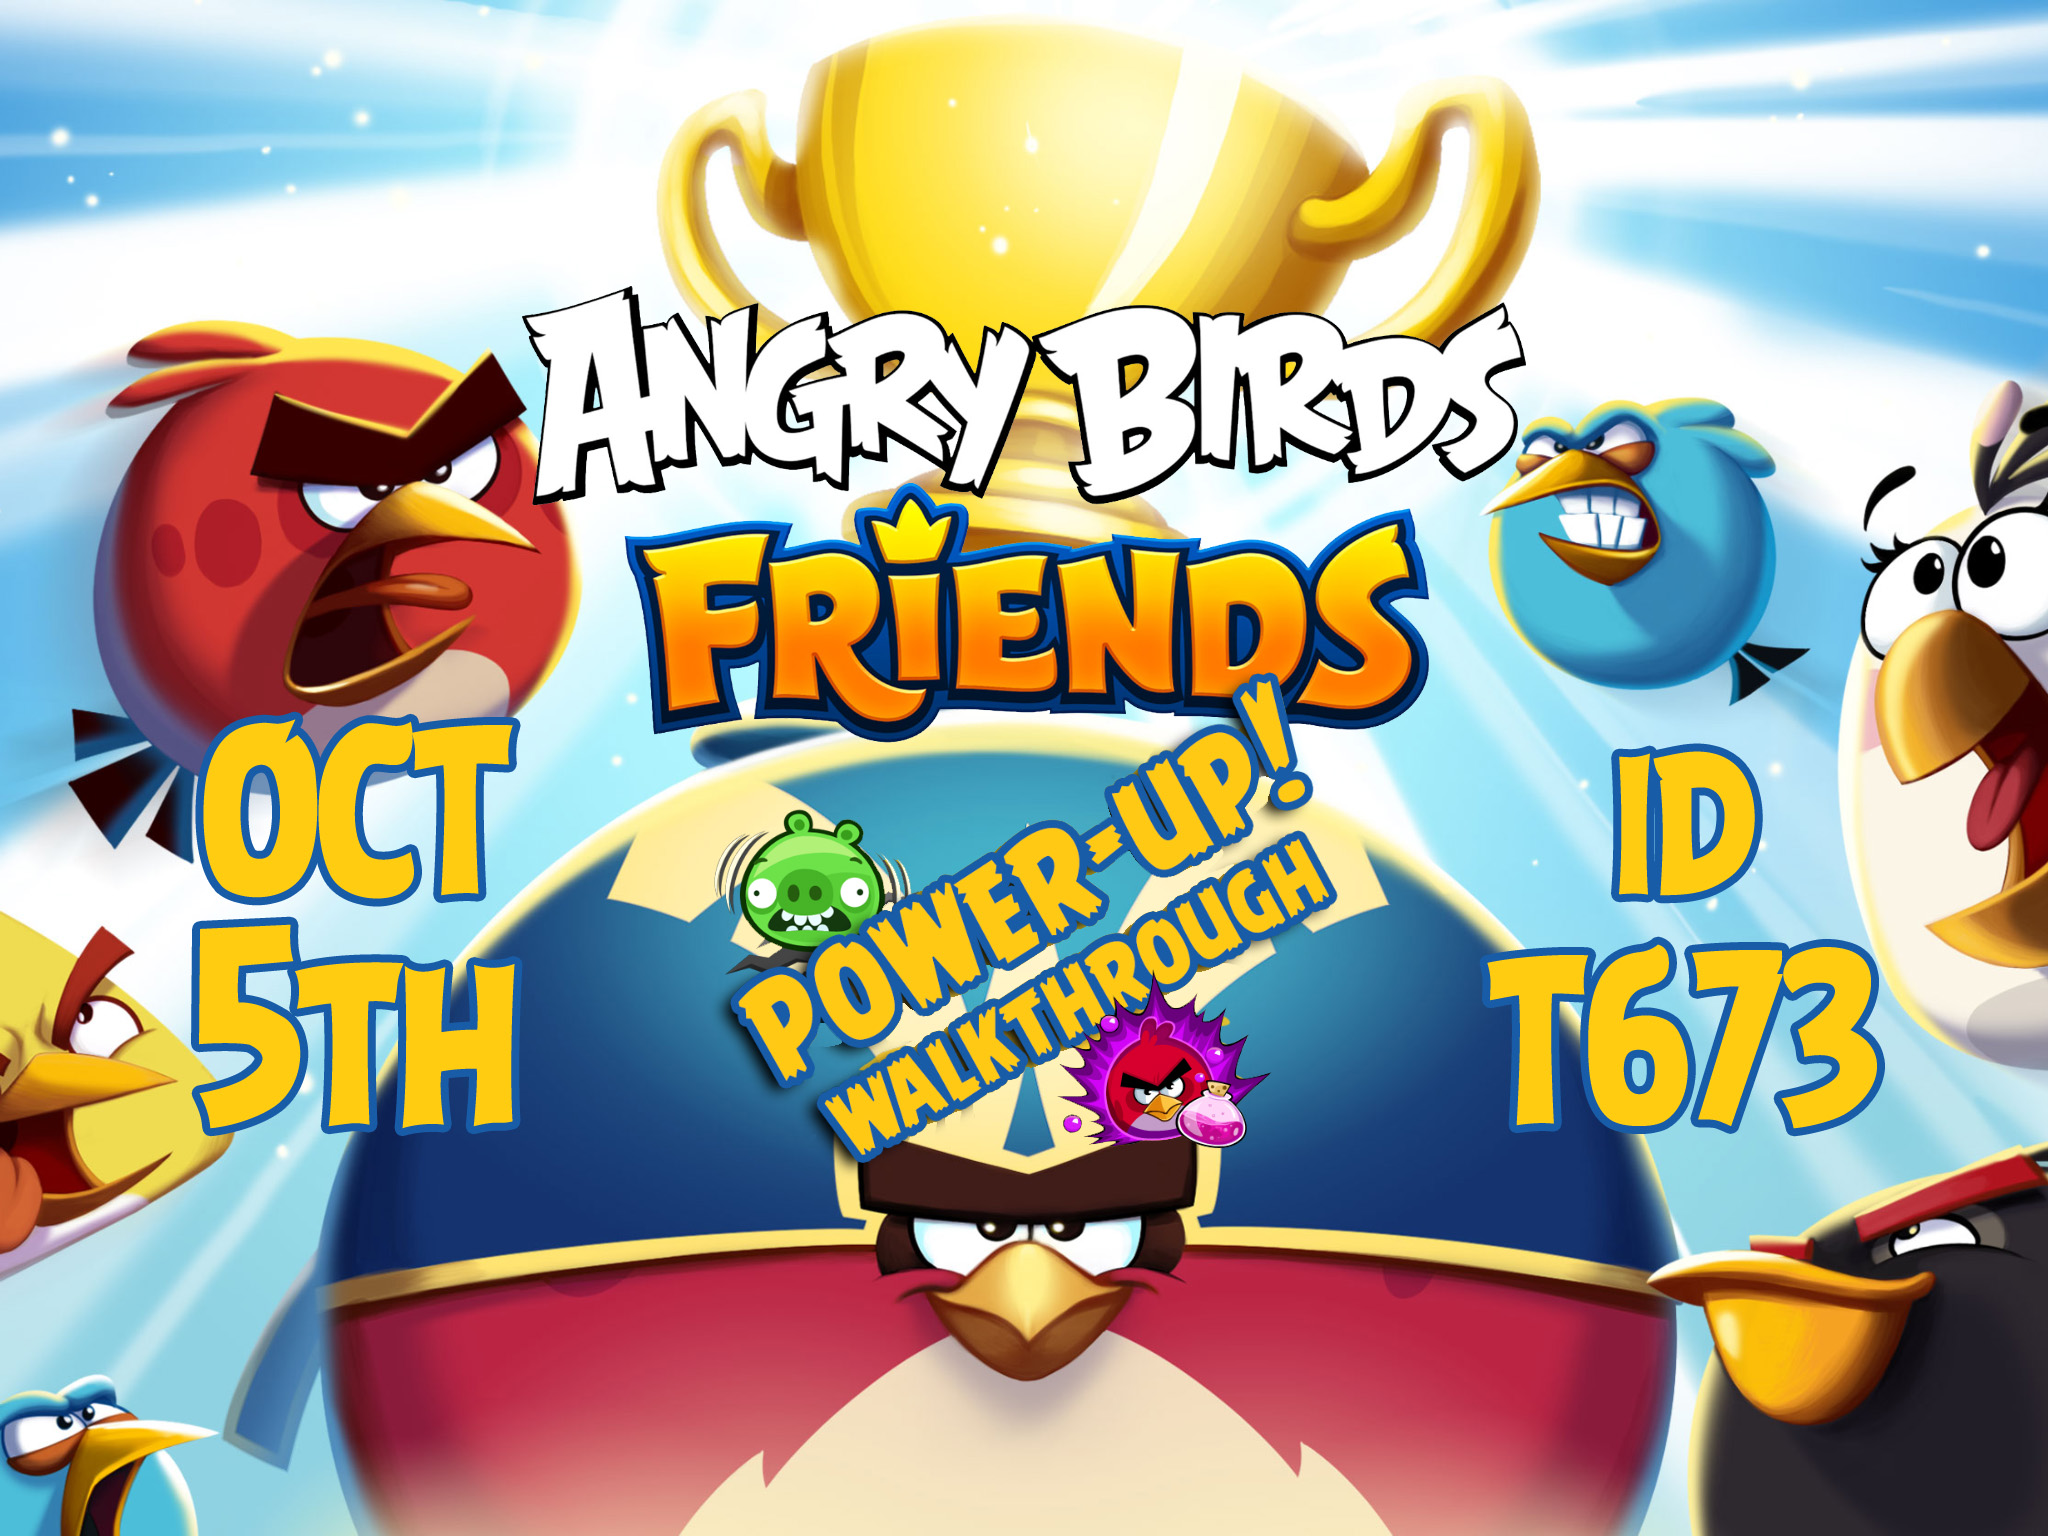 Angry-Birds-Friends-Tournament-T673-Feature-Image-PU